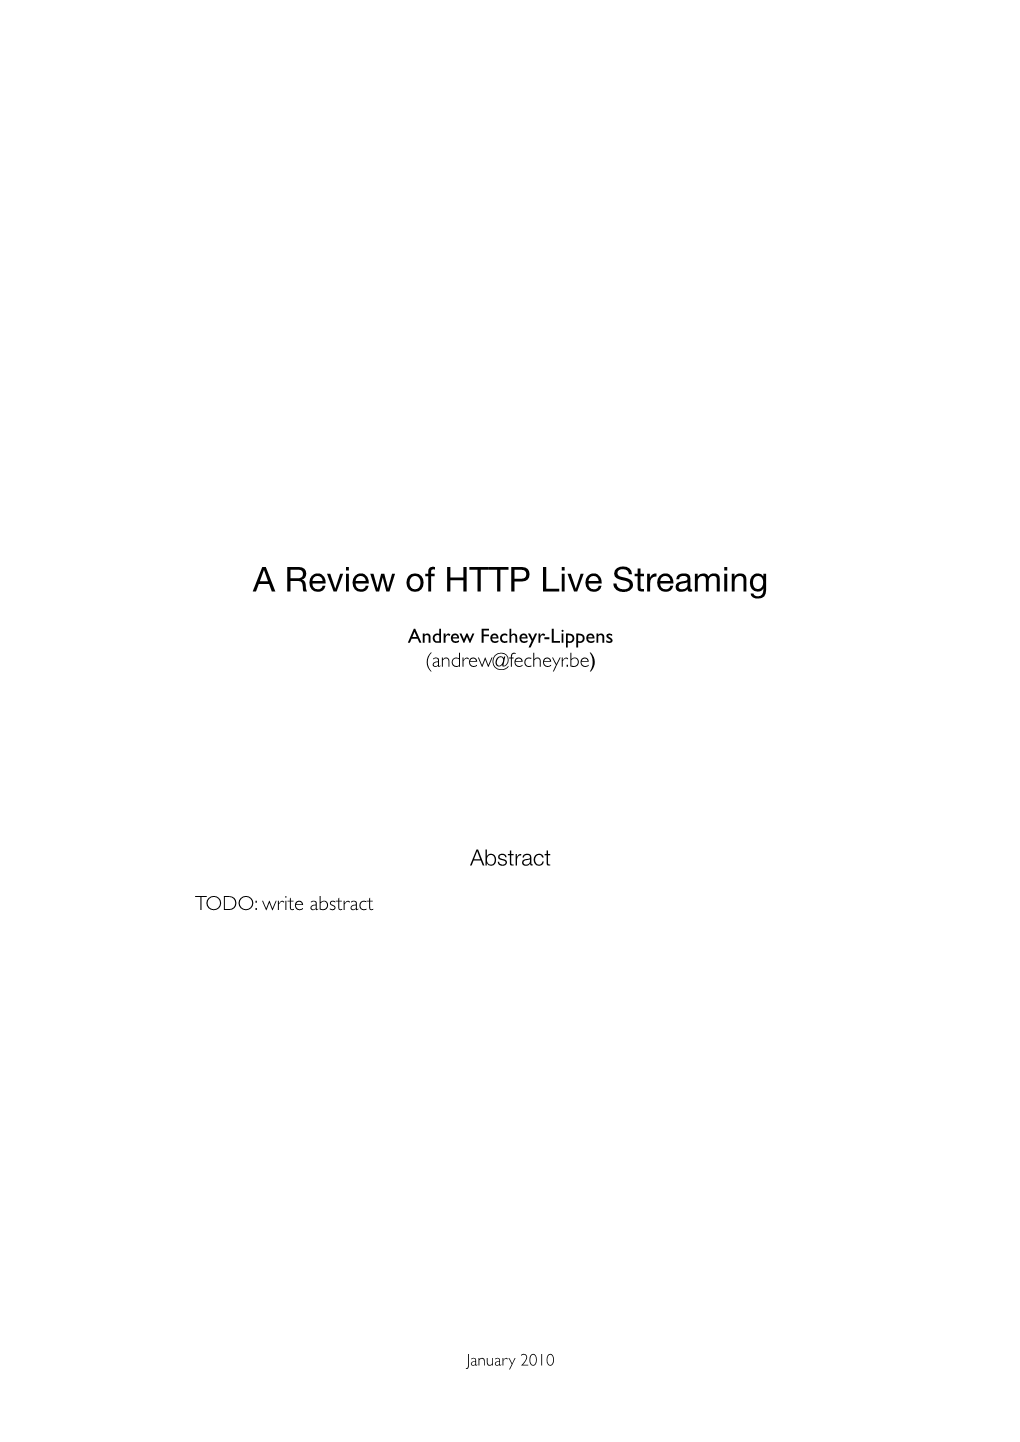 A Review of HTTP Live Streaming